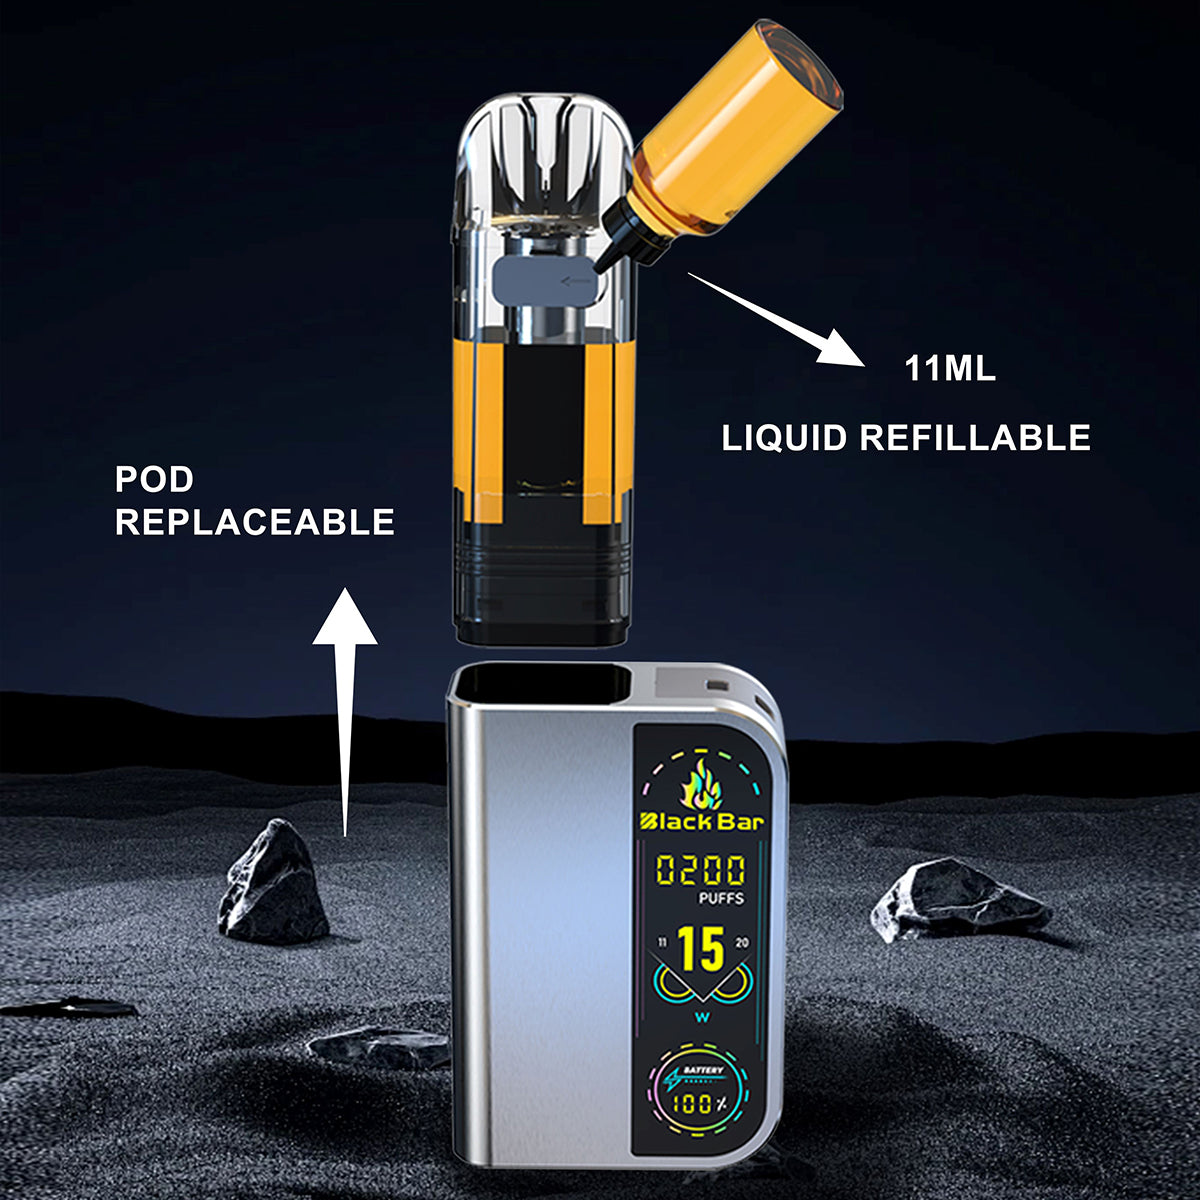 HD20-11ml oil-filled style Pod replaceable airflow adjustable airflow adjustable battery changeable